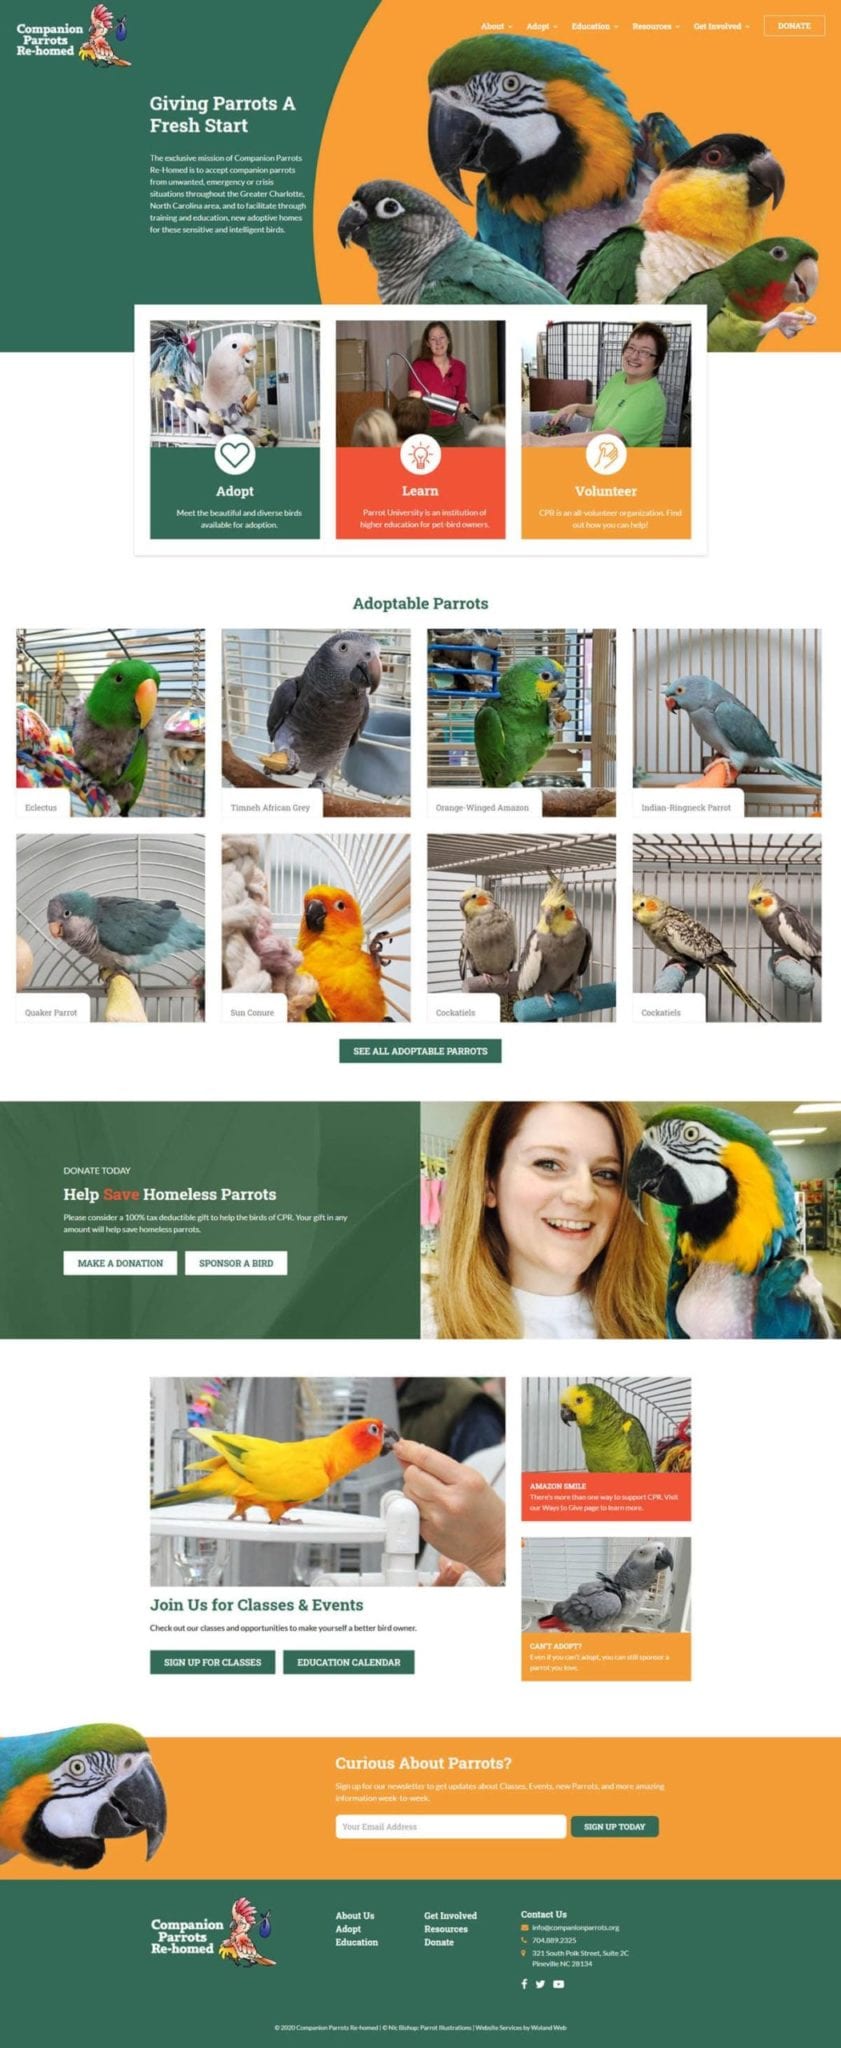 Companion Parrots ReHomed website adoption page screenshot